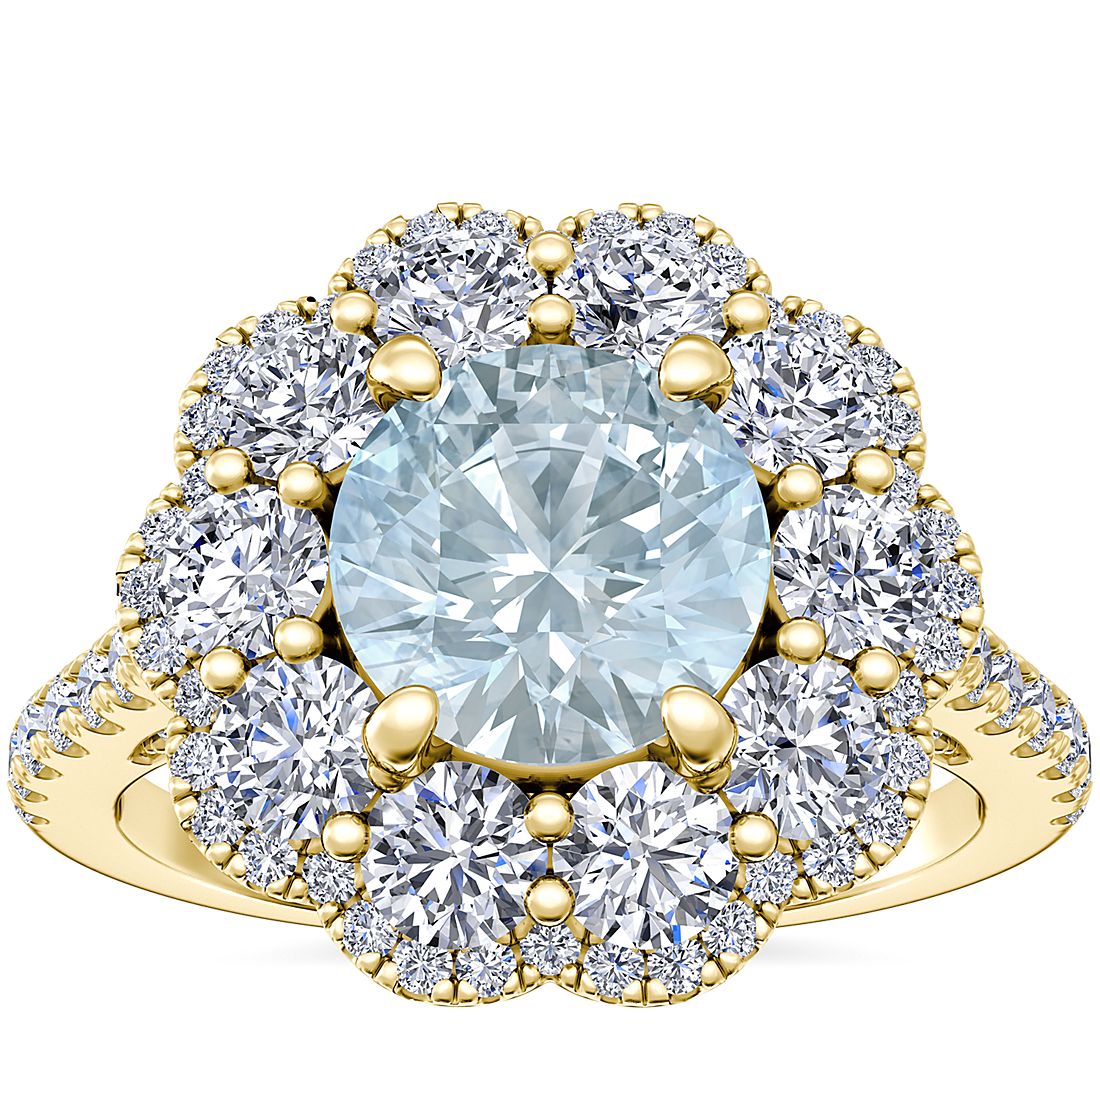 Vintage Diamond Halo Engagement Ring with Round Aquamarine in 14k Yellow Gold (6.5mm)